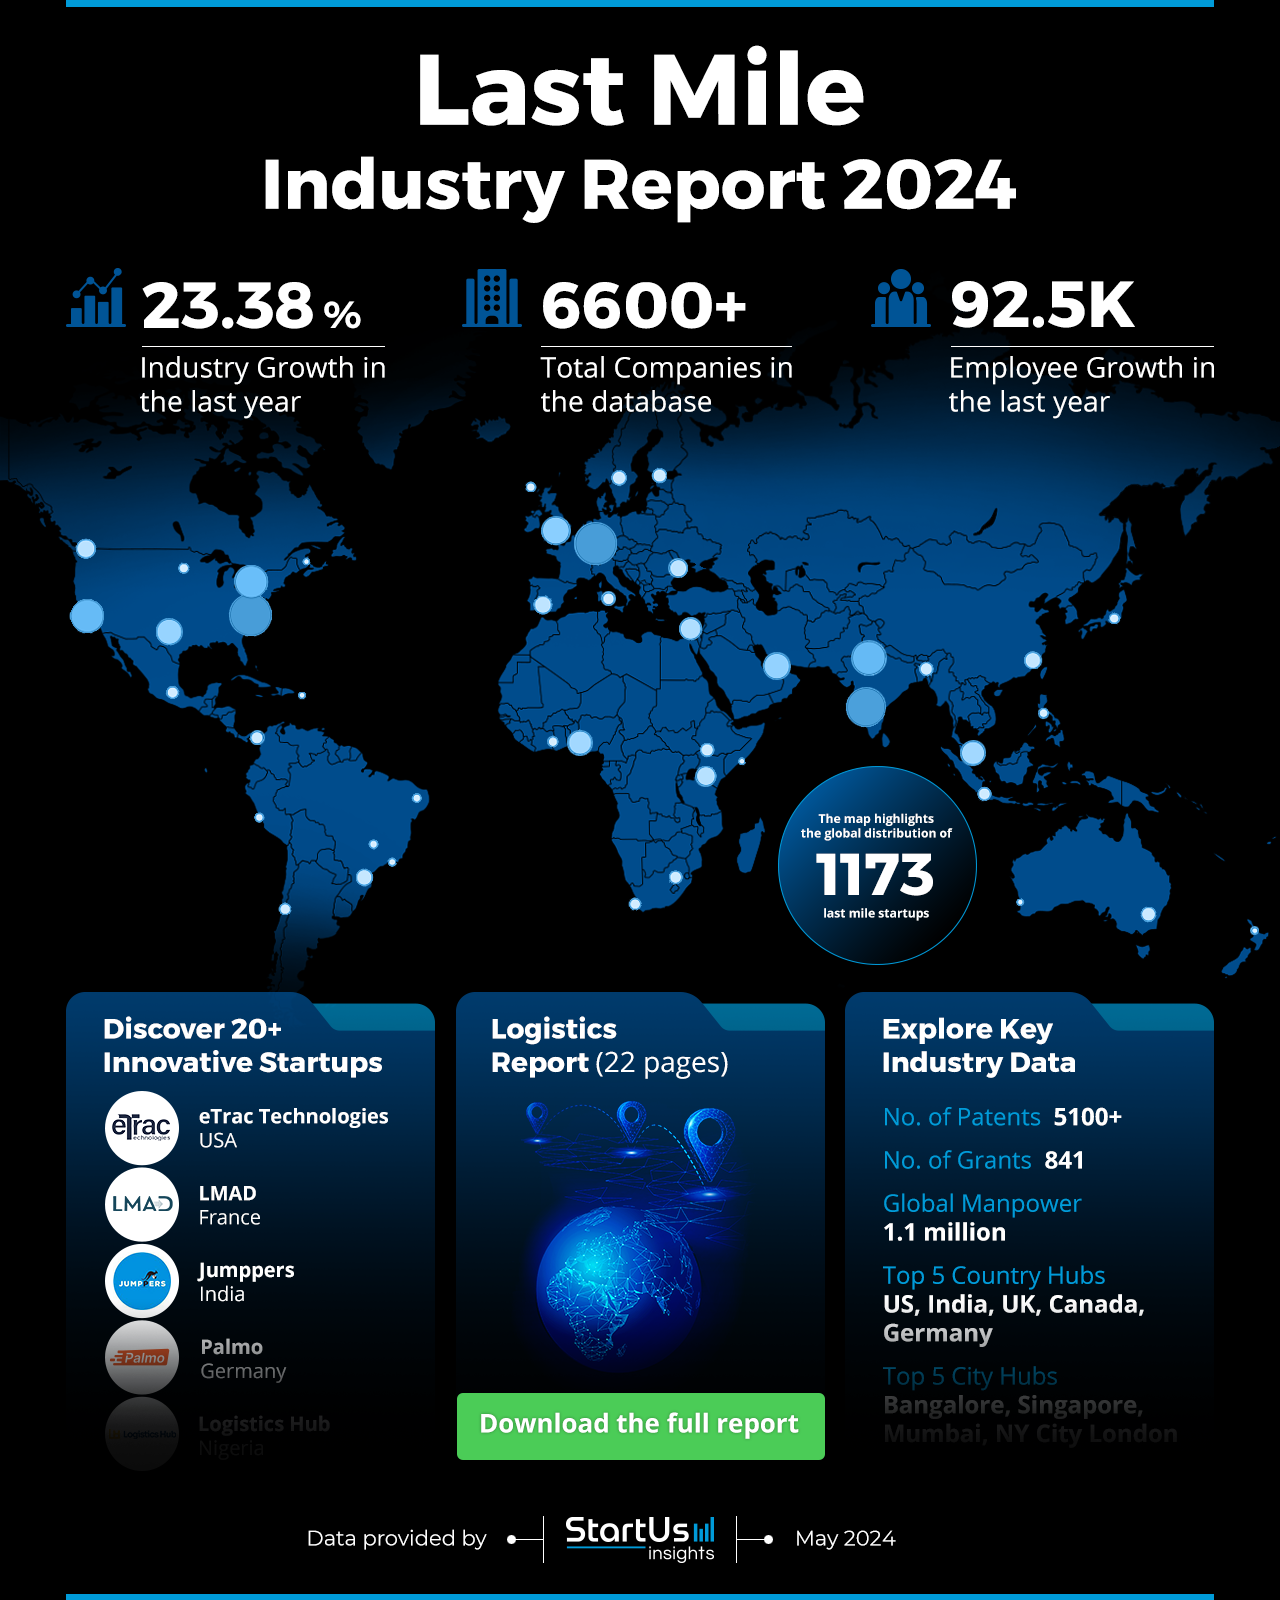 Last-Mile-Industry-Report-HeatMap-StartUs-Insights-noresize